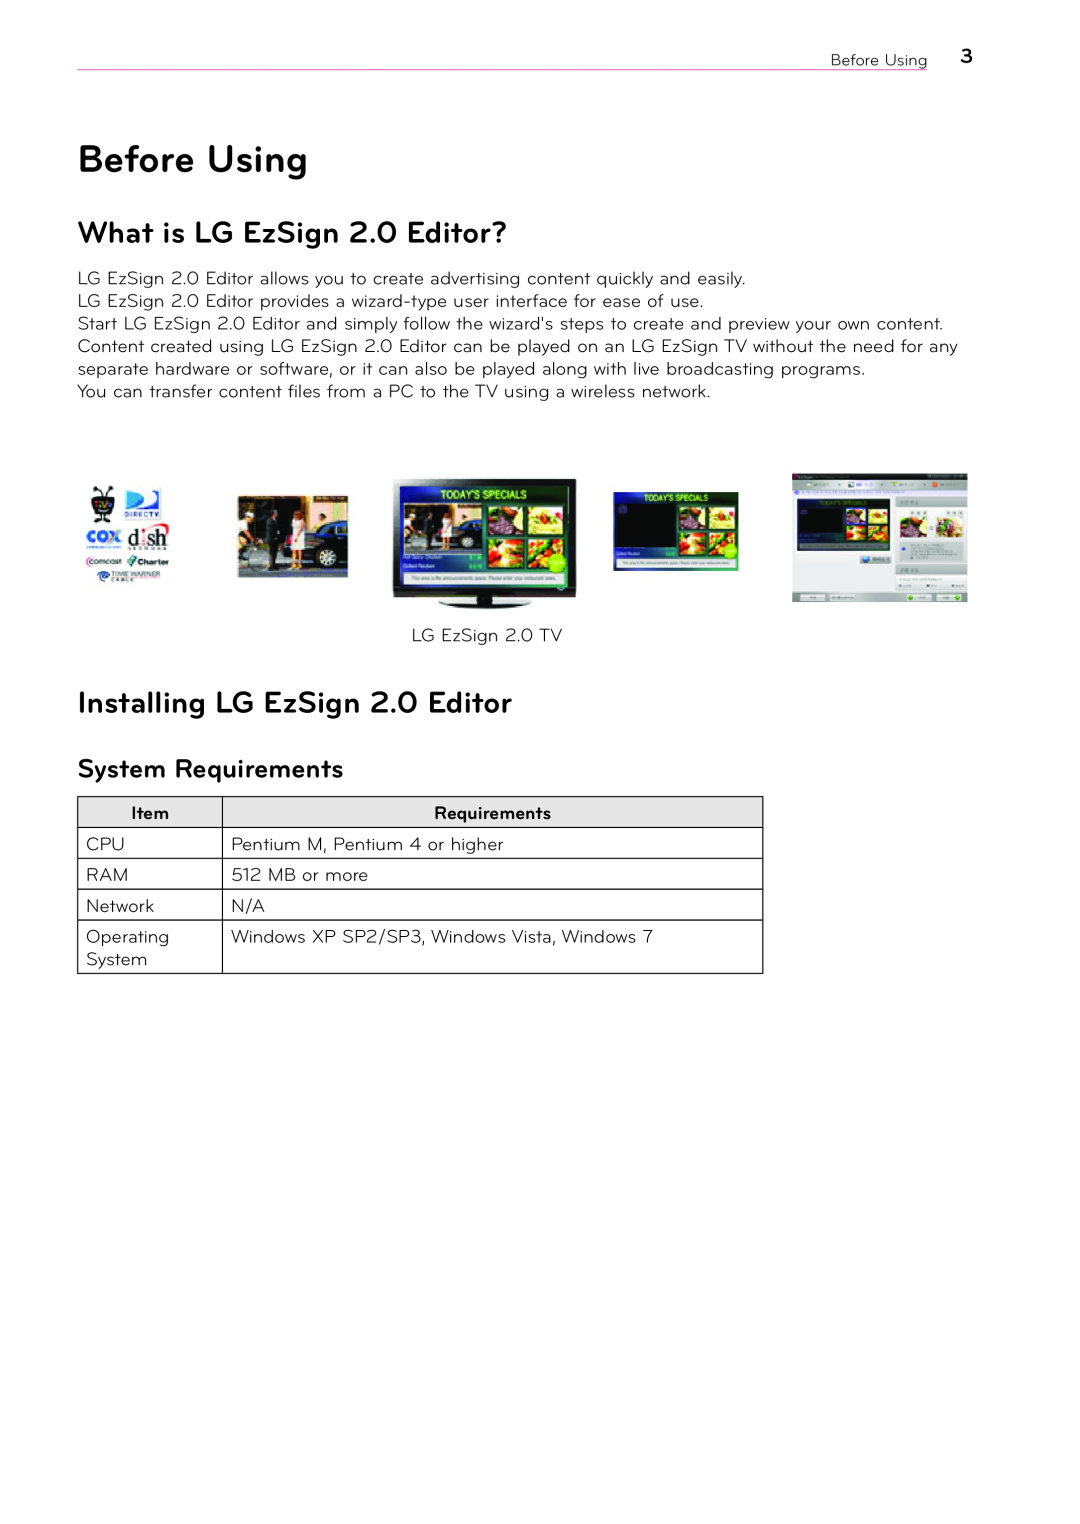 LG Electronics manual Before Using, What is LG EzSign 2.0 Editor?, Installing LG EzSign 2.0 Editor, System Requirements 